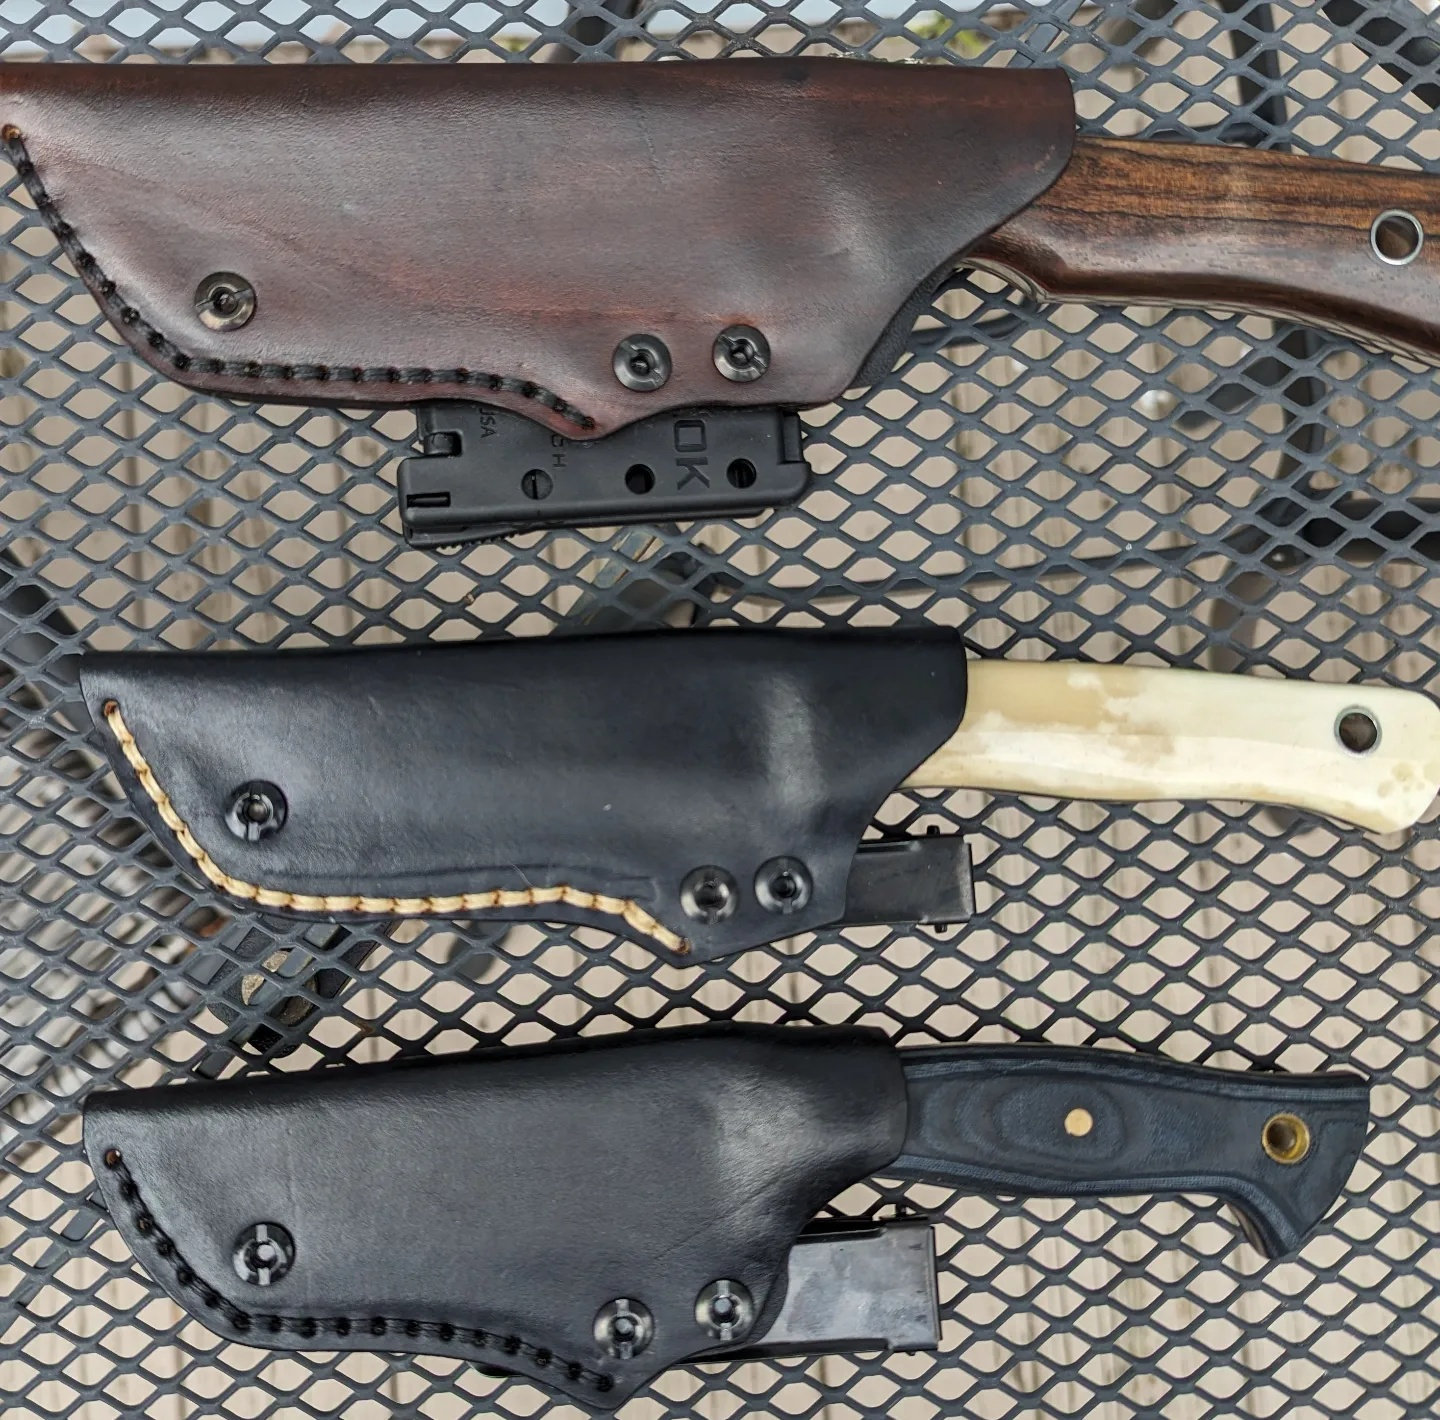 Leather, Plastic, Nylon or Custom Kydex Knife Sheaths for Fixed Blades? -  The Knife Connection